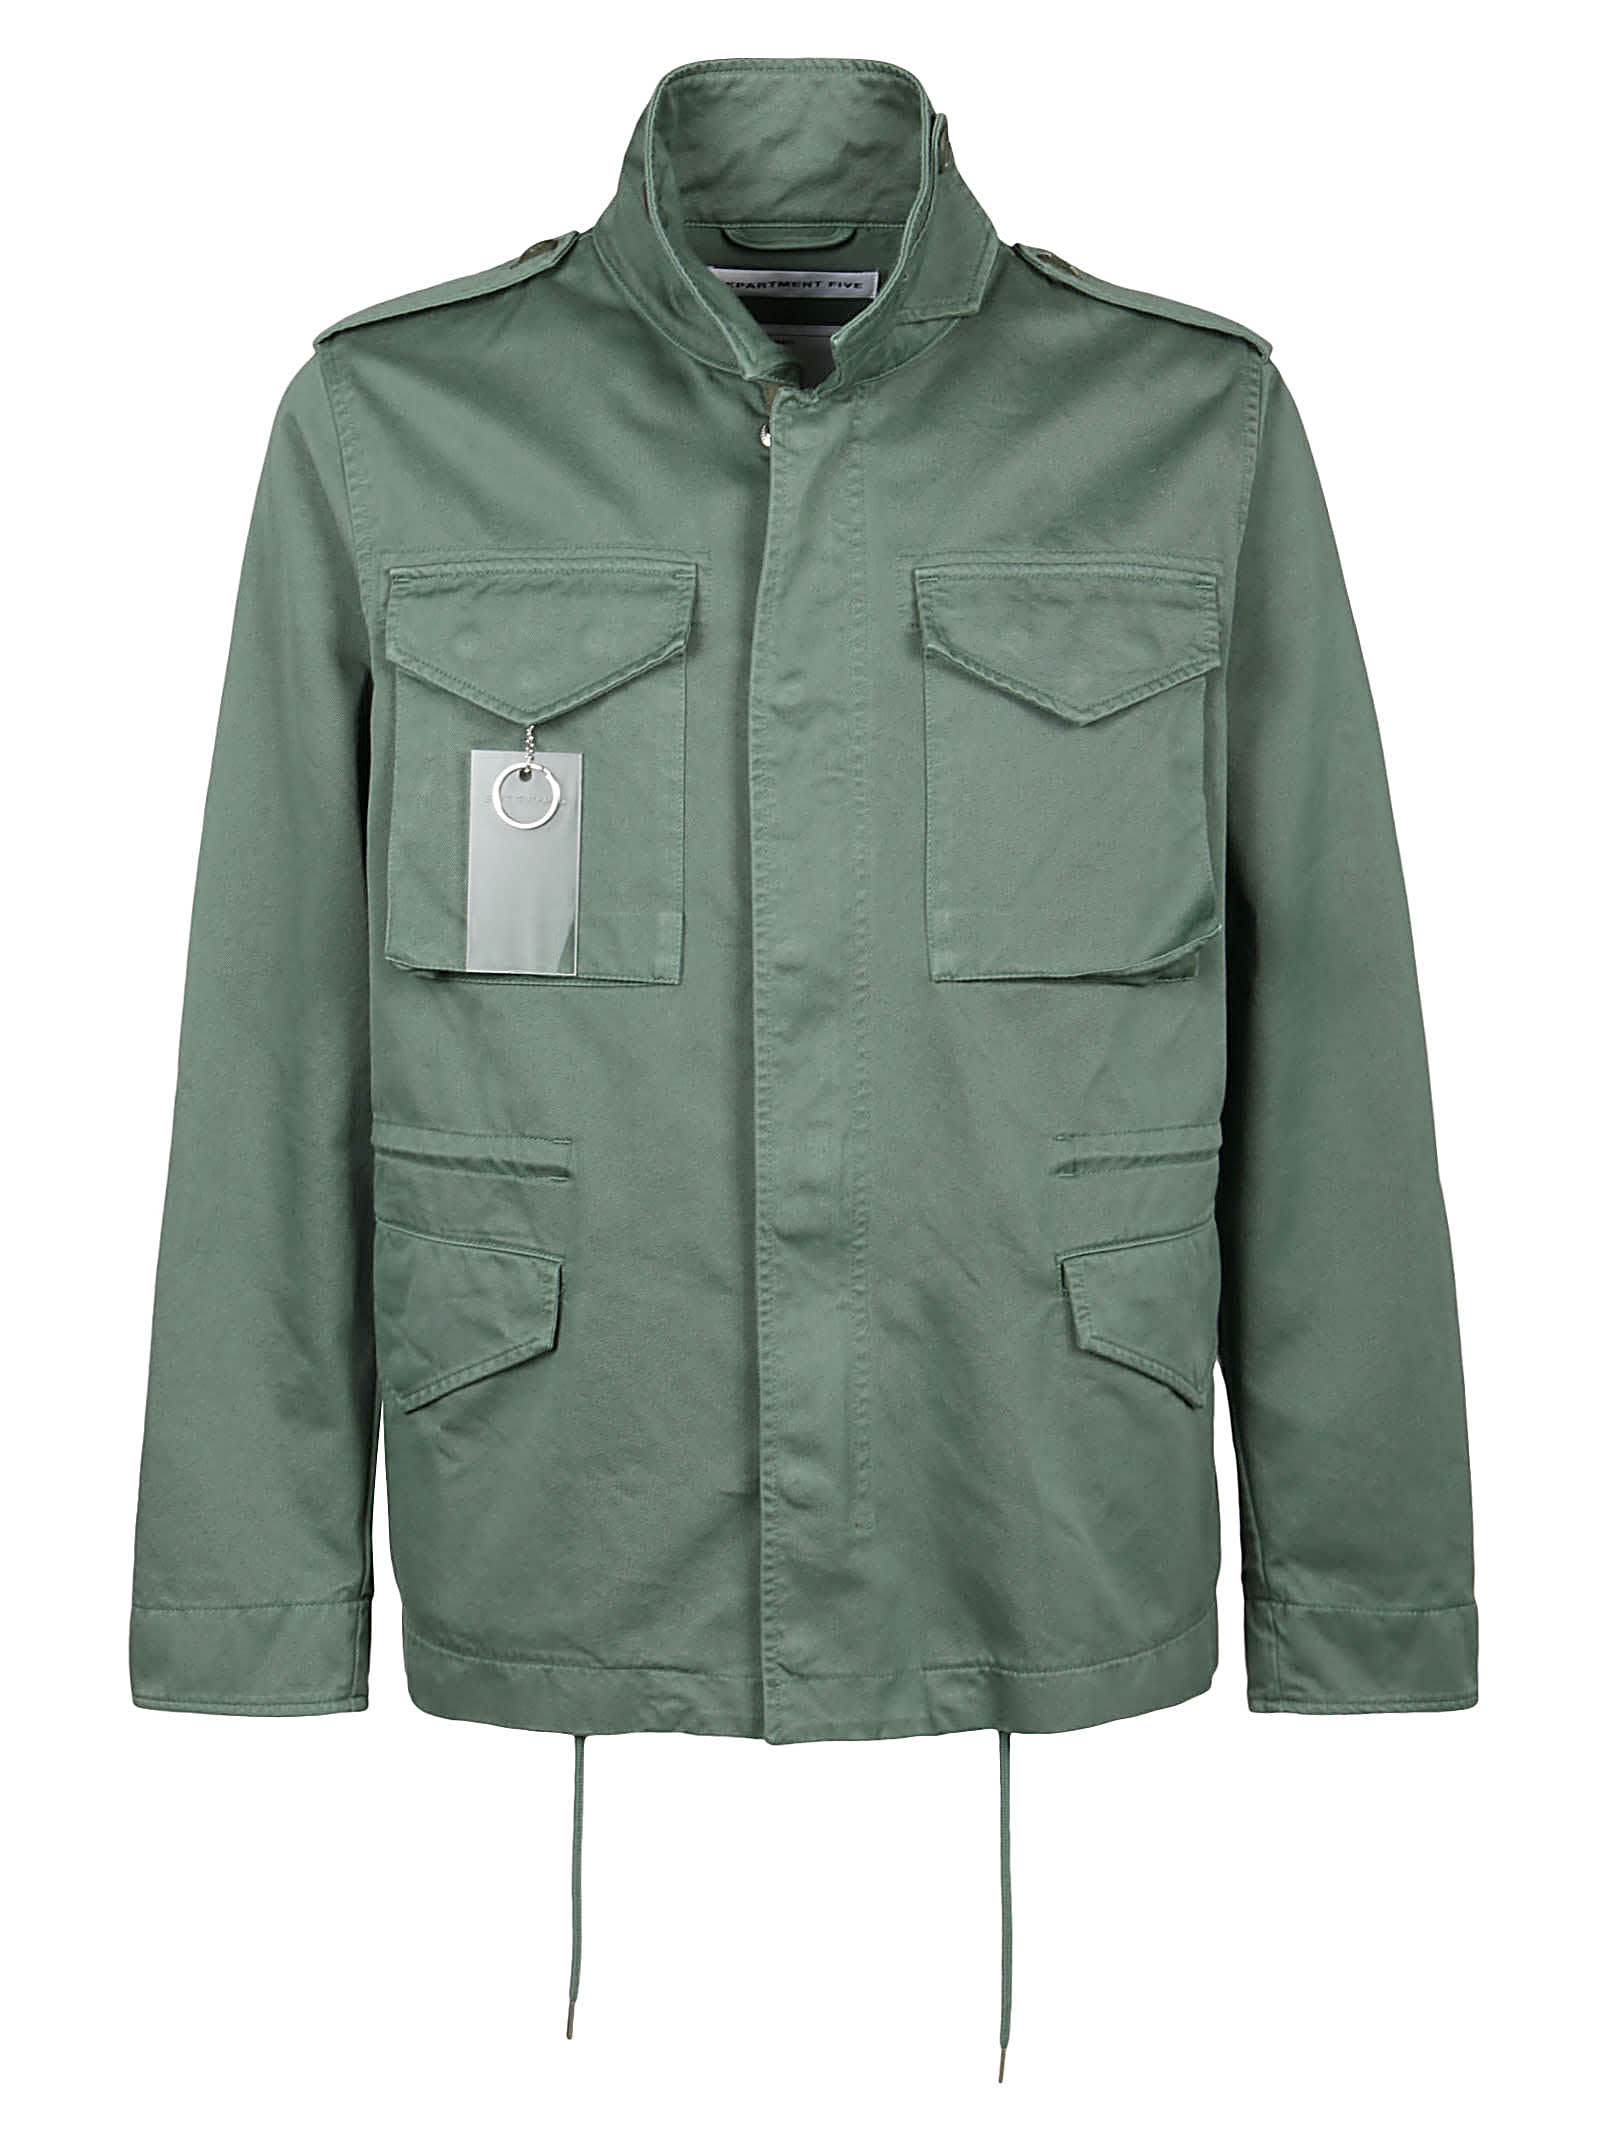 Department Five Band Field Jacket